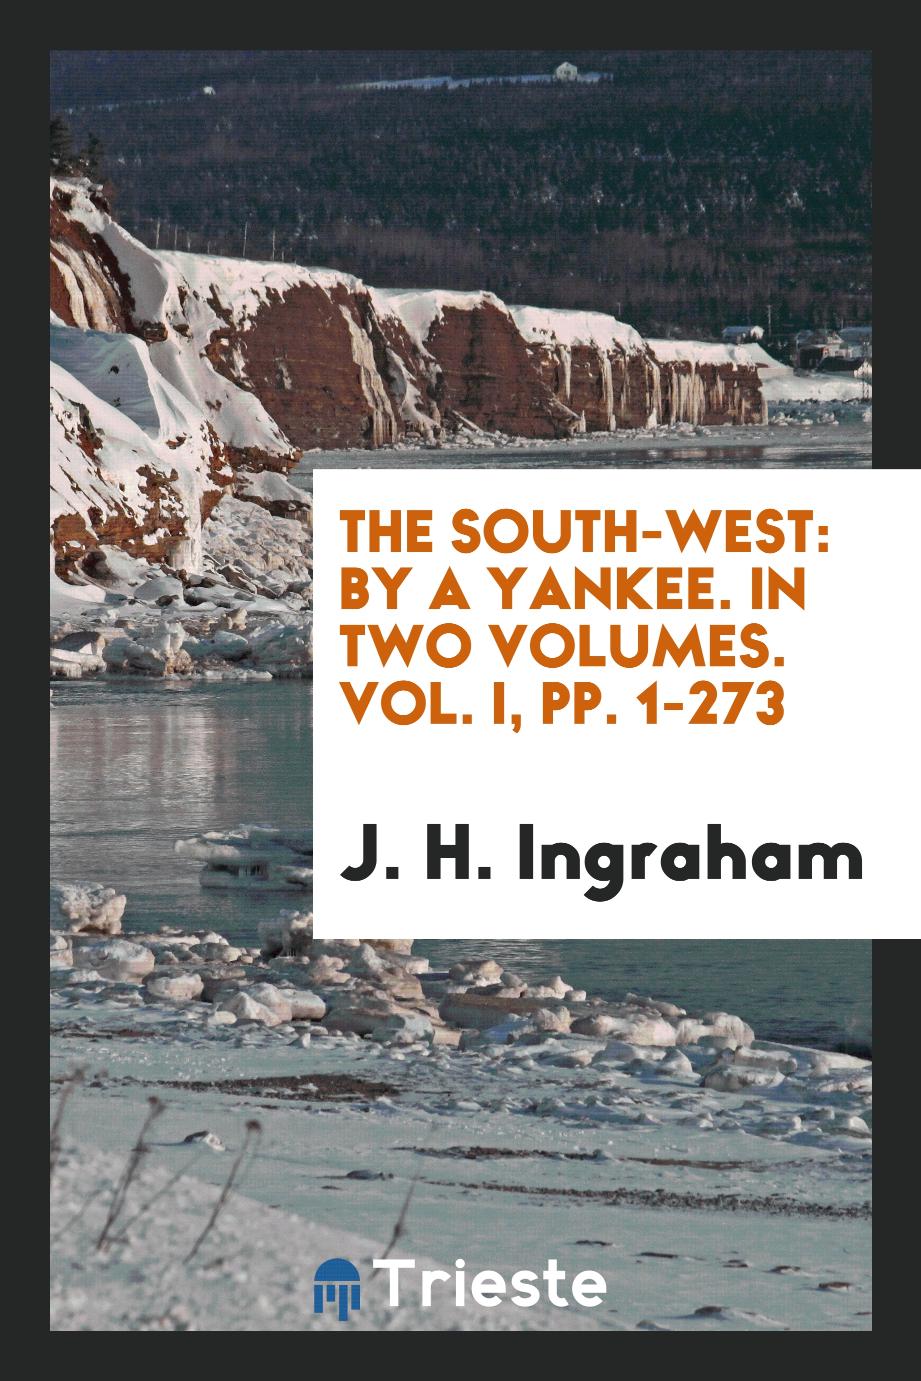 The South-West: By a Yankee. In Two Volumes. Vol. I, pp. 1-273